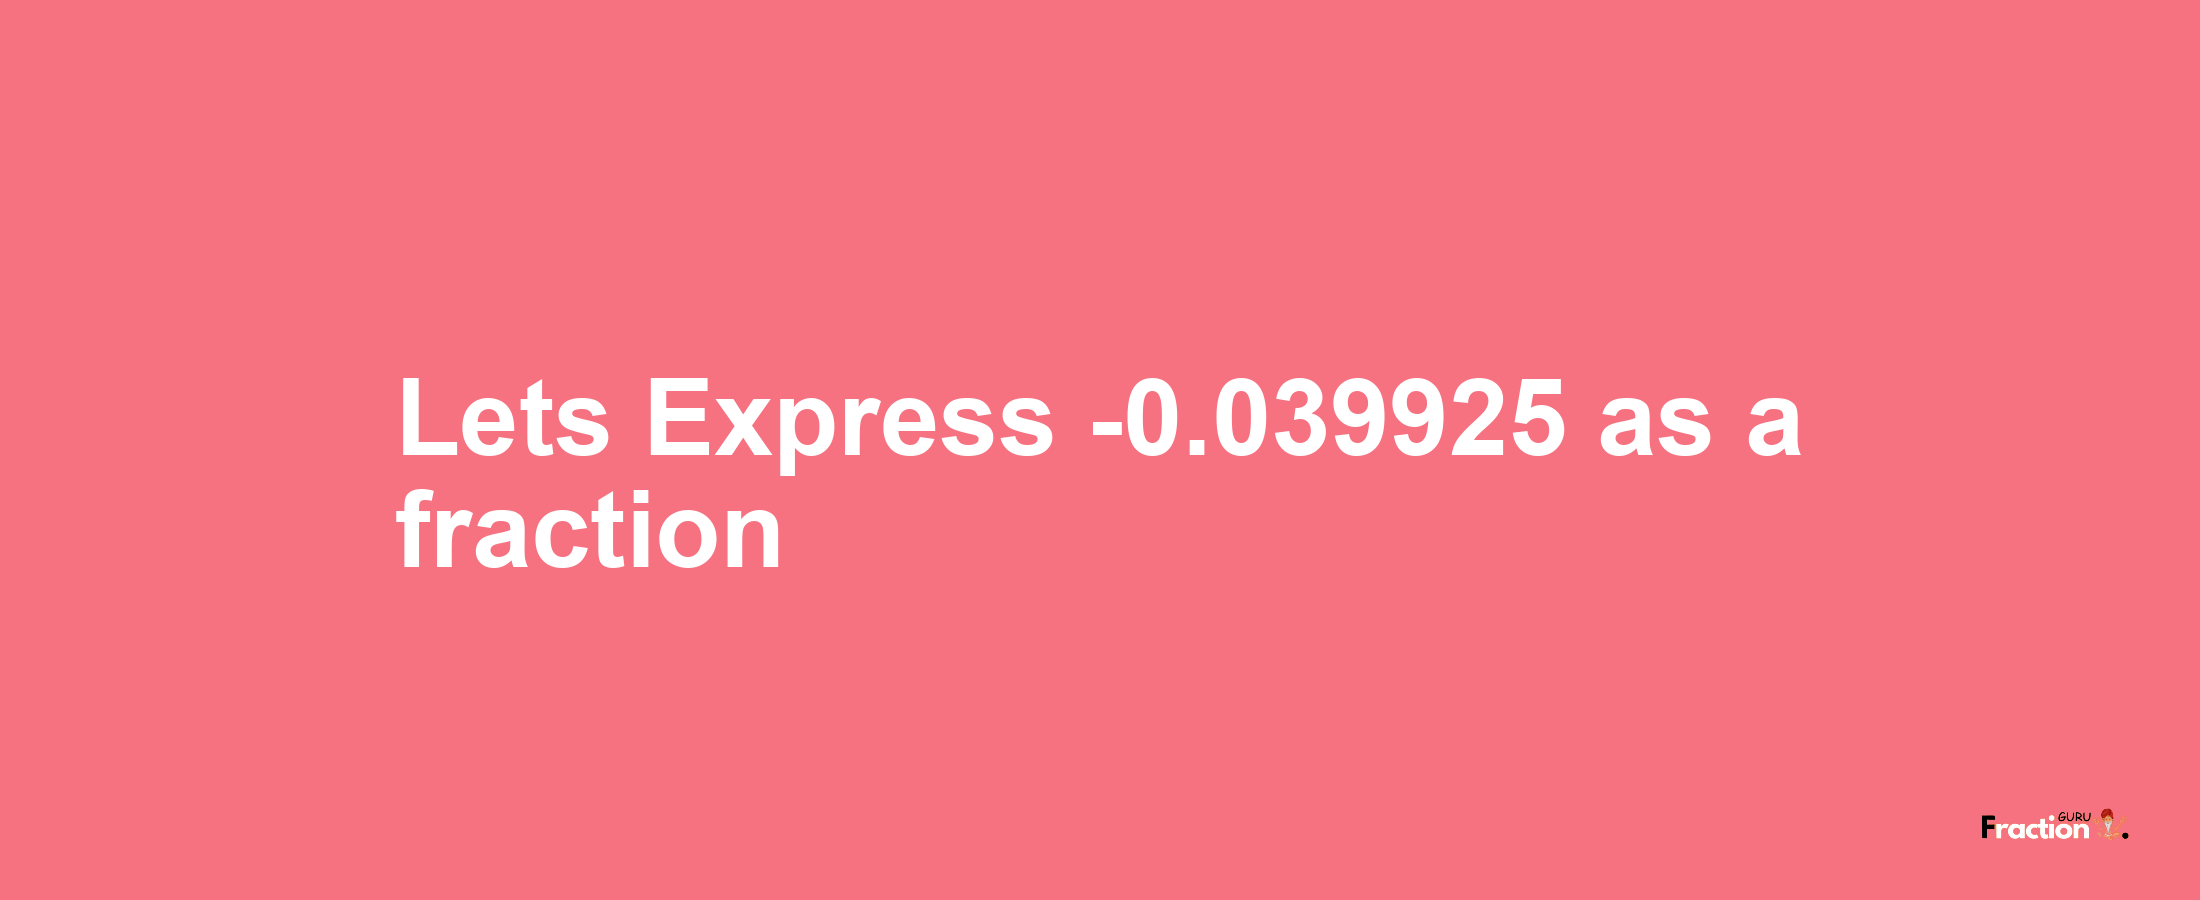 Lets Express -0.039925 as afraction